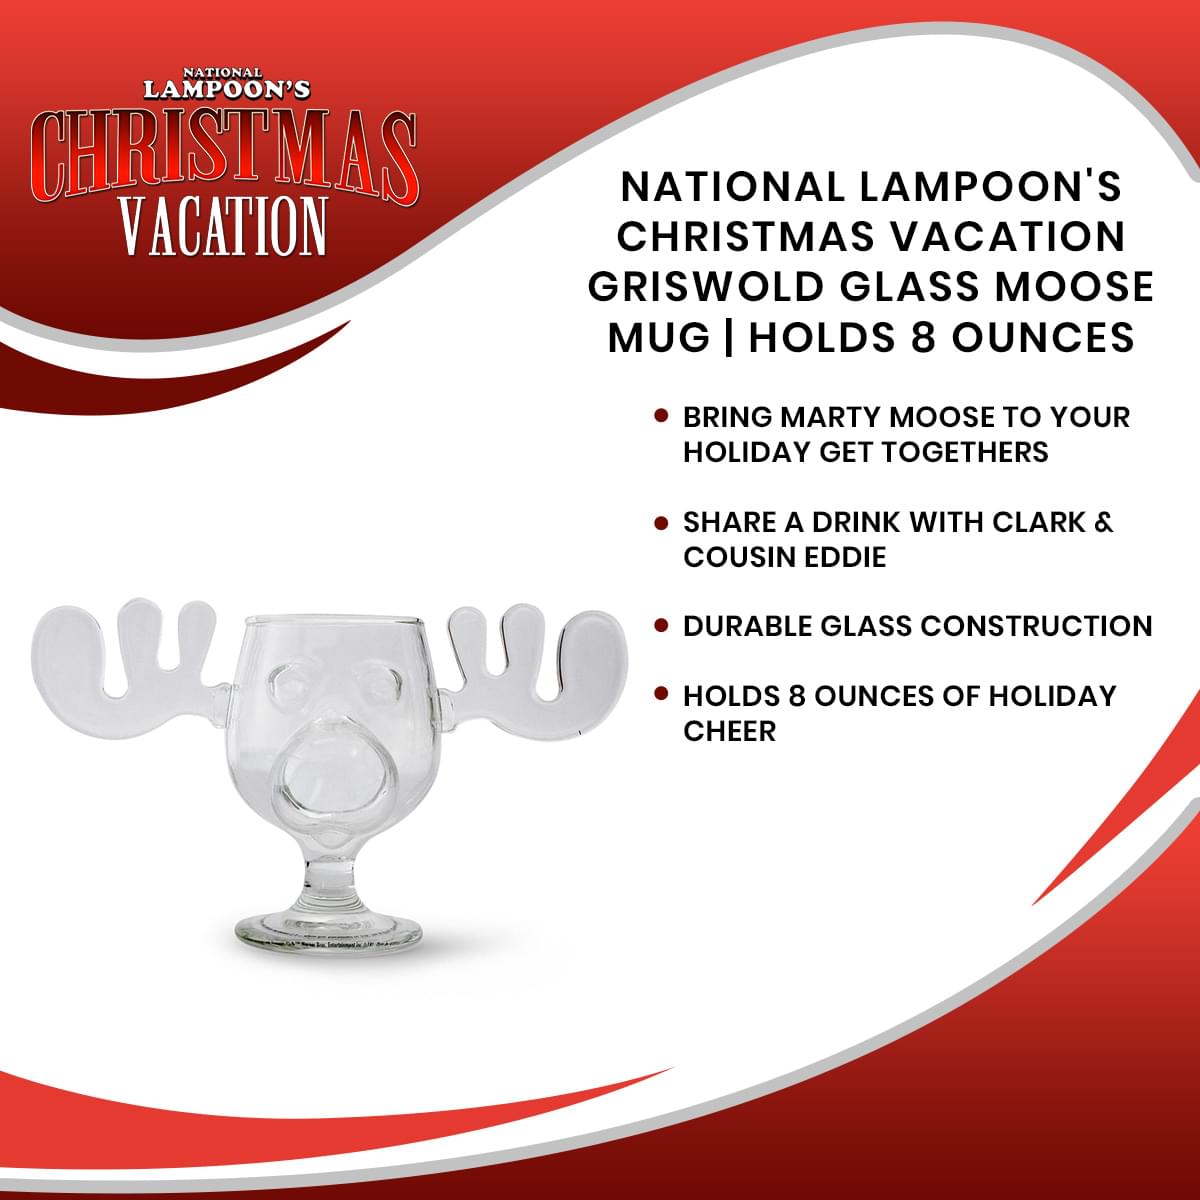 National Lampoon's Christmas Vacation Griswold Glass Moose Mug | Holds 8 Ounces